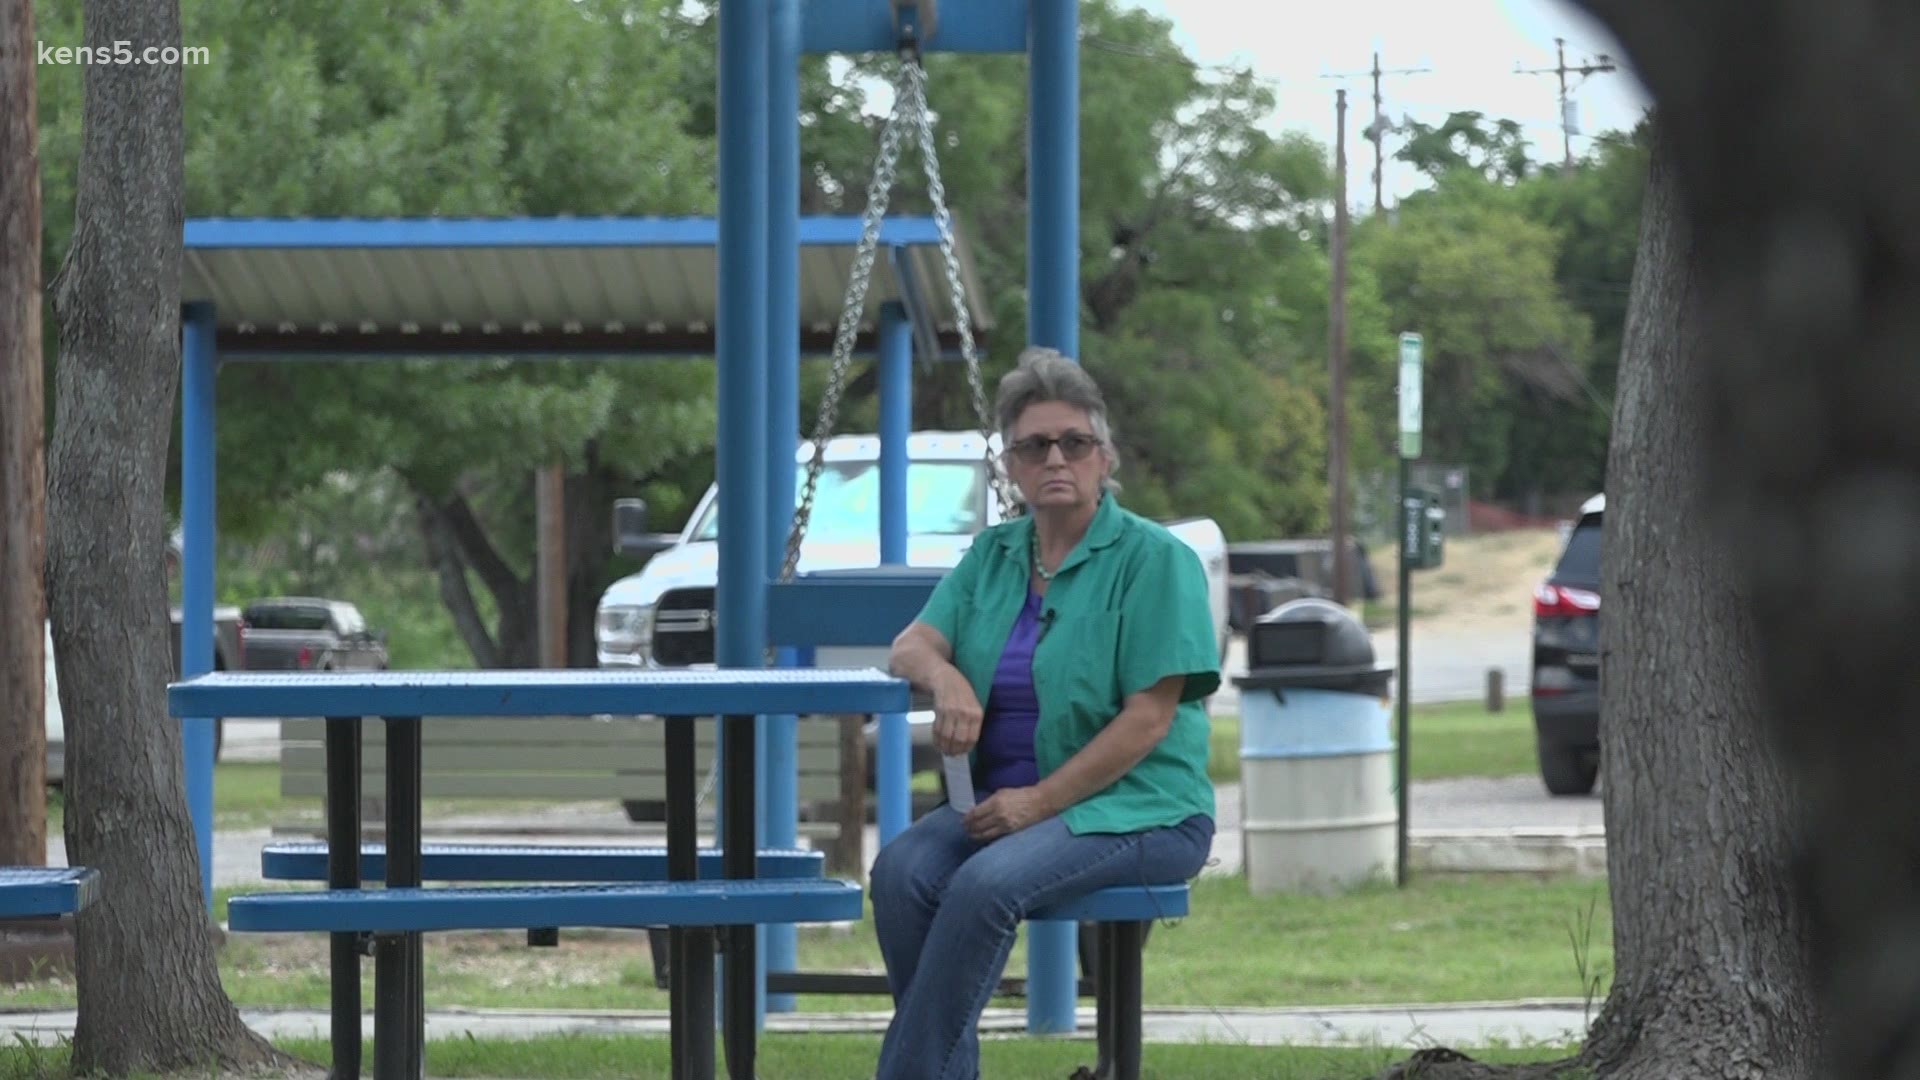 Last week, a stranger tried to pick up a young girl from a Bandera, Texas daycare. A few days later, others attempted the same at a New Braunfels summer camp.